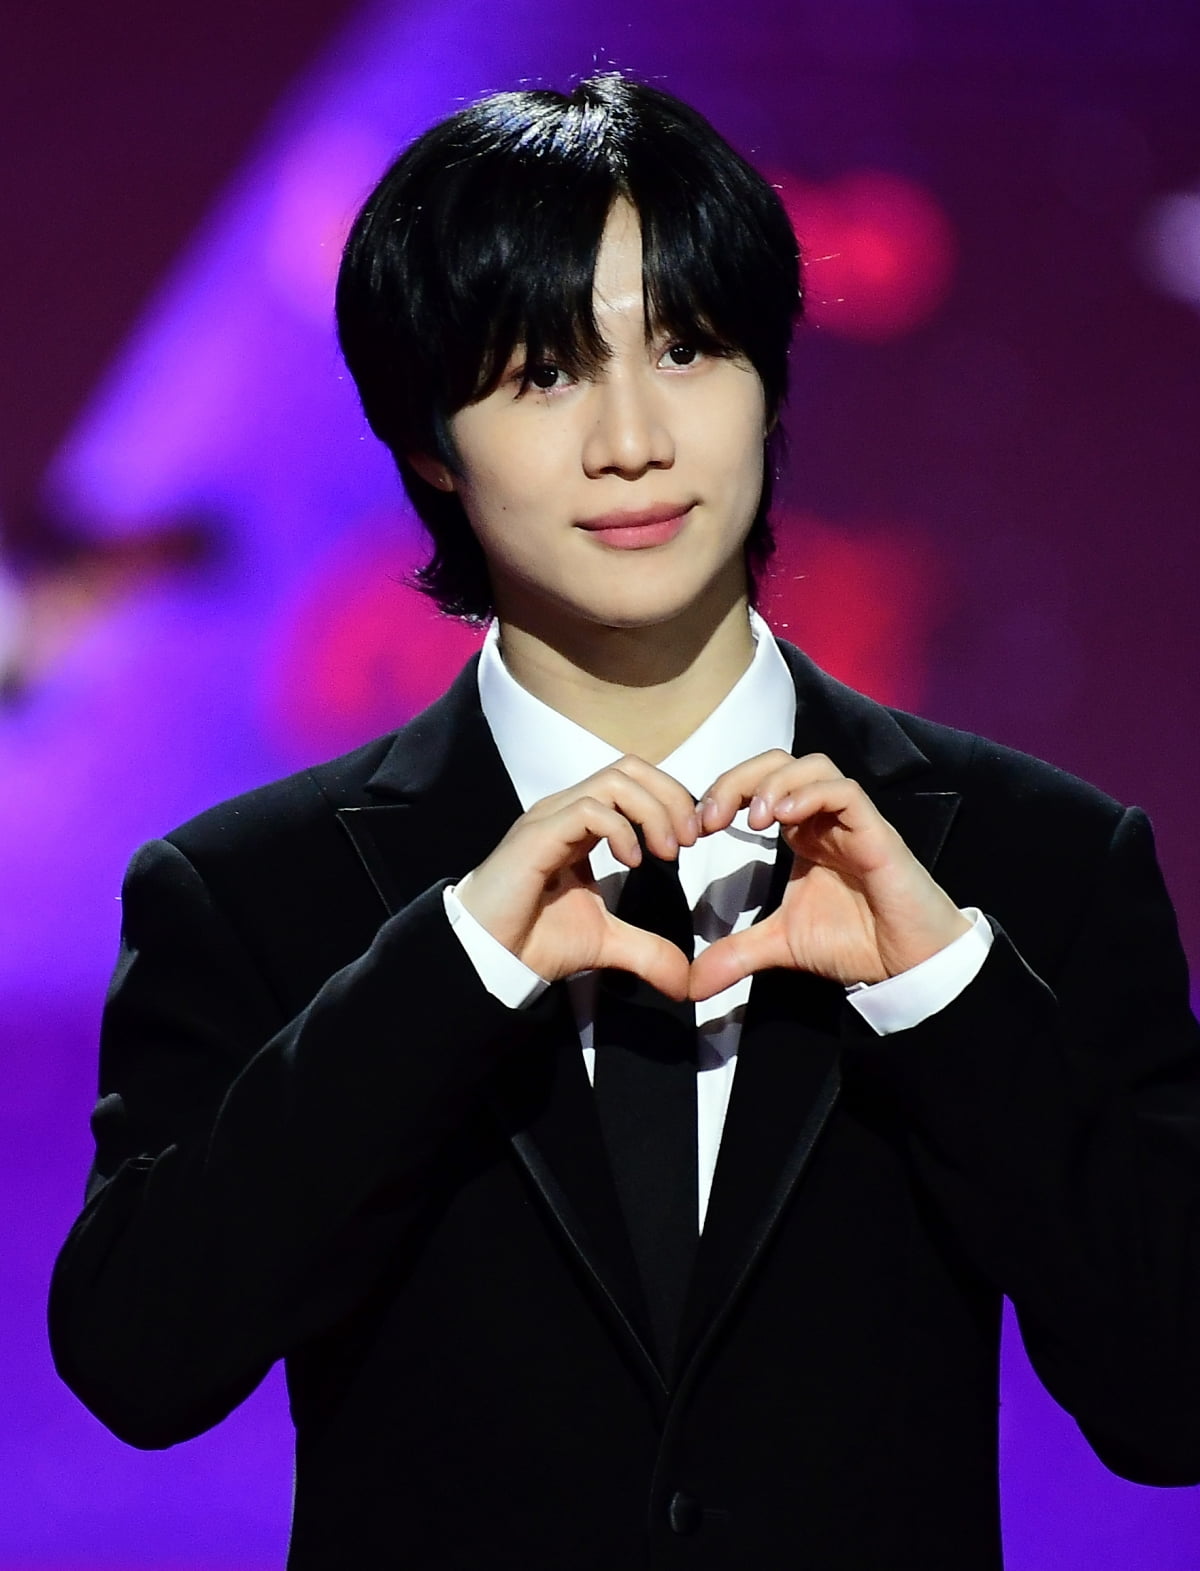 SHINee's Taemin leaves SM and joins Big Planet Made... “End of worries, new start”